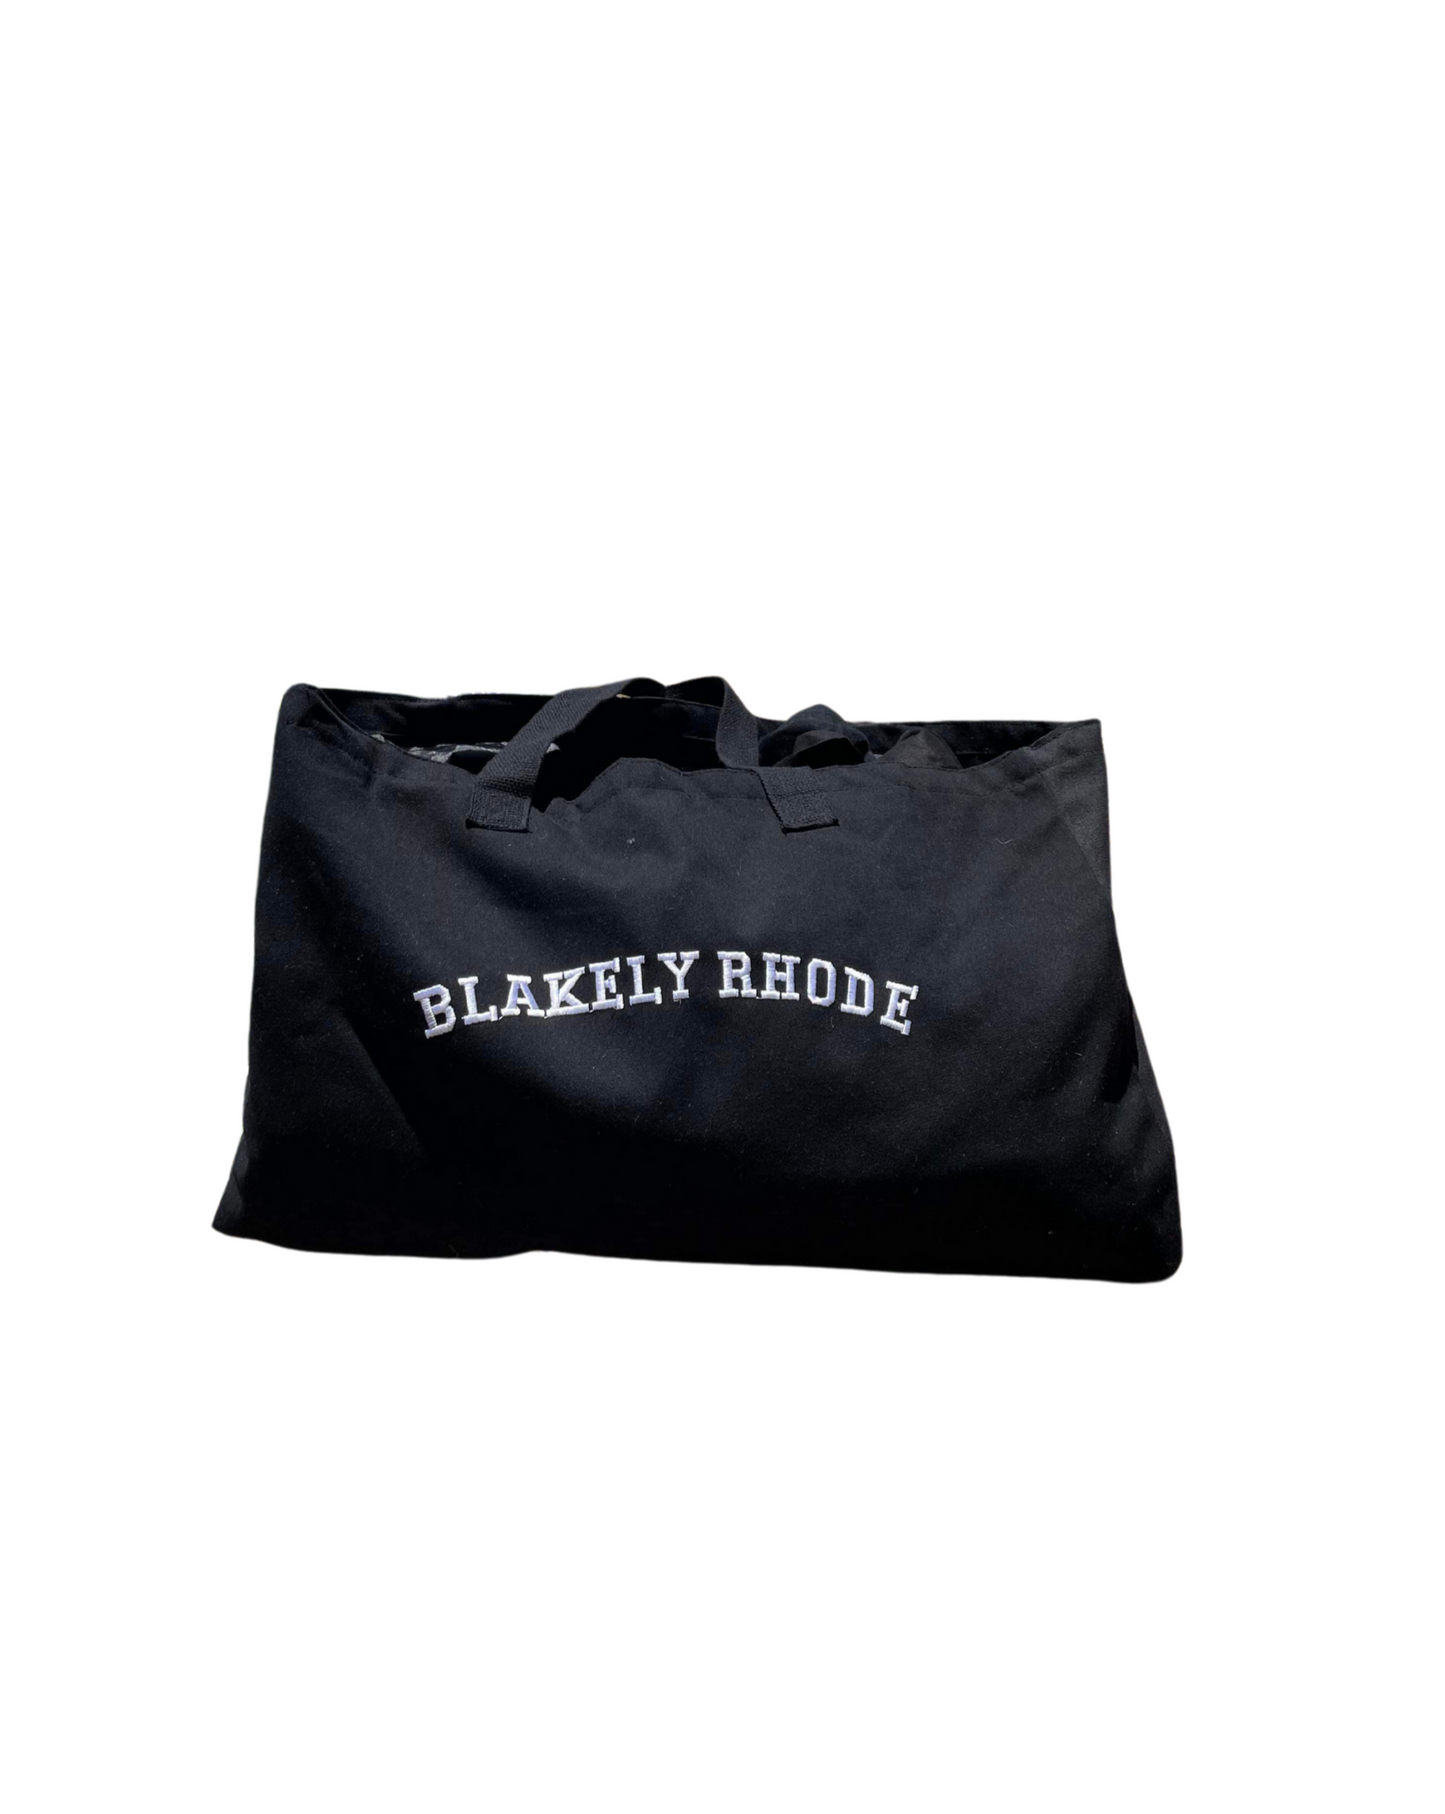 Blakely Rhode Vacation Canvas Tote Black + White